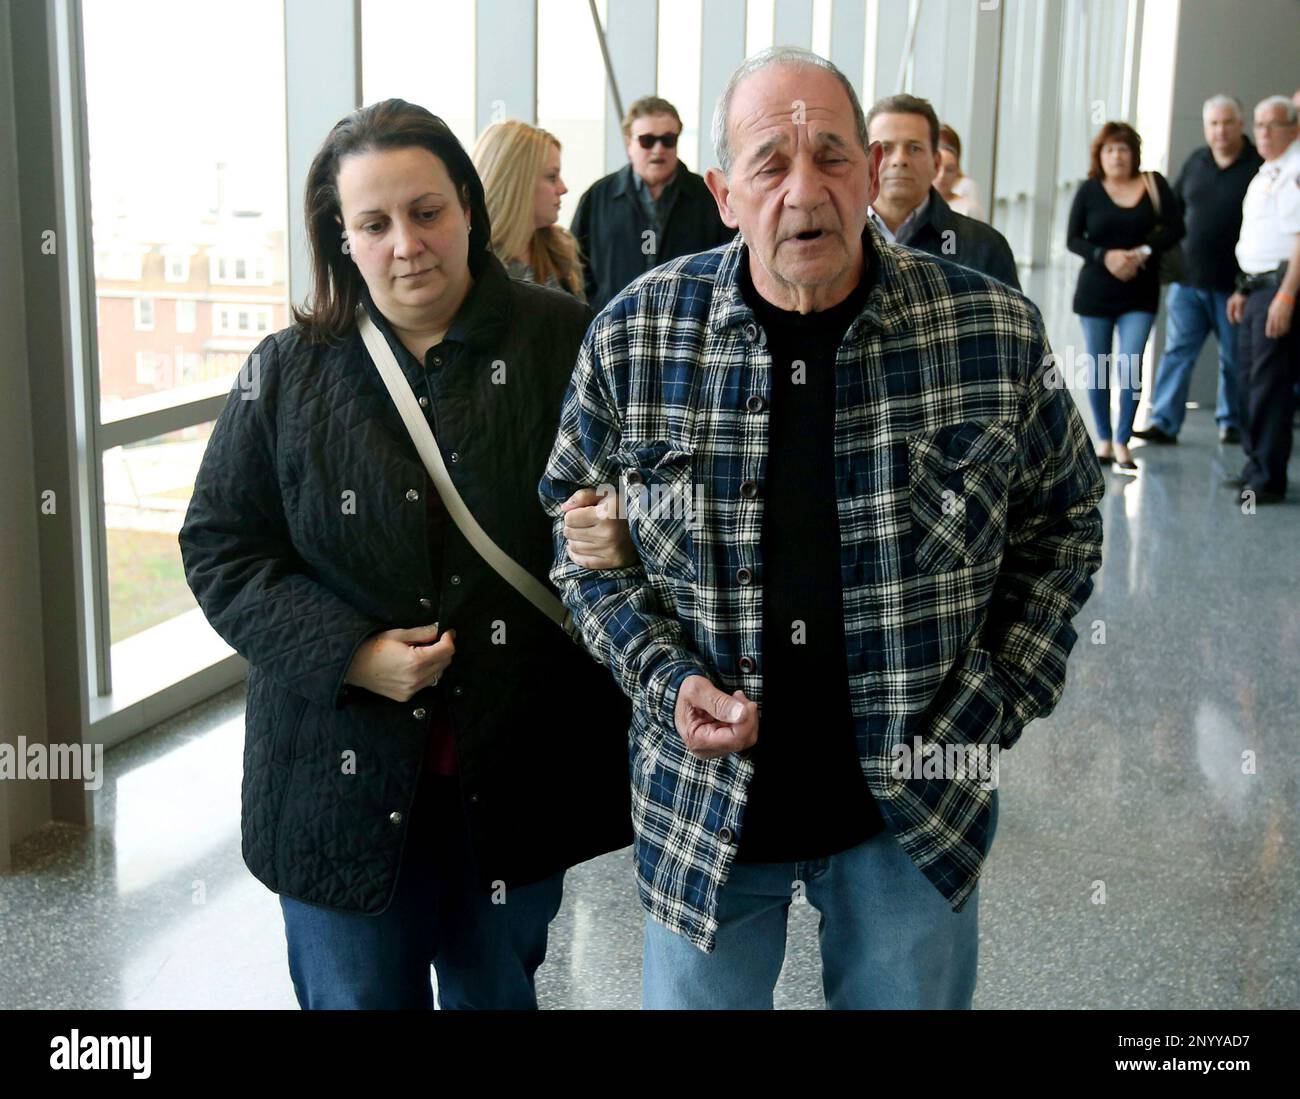 In this Thursday, May 4, 2017 photo, Roseann Rodriguez and Angelo Rodriguiez, the sister and father of the deceased Joseph Rodriguez, walk inside the Richmond Supreme Courthouse, in Staten Island, N.Y. Former New Jersey police officer Pedro Abad was convicted Thursday in a wrong-way crash that killed a fellow officer and Rodriguez in what prosecutors said was the result of extreme intoxication. (Ed Murray/NJ Advance Media via AP) Foto Stock